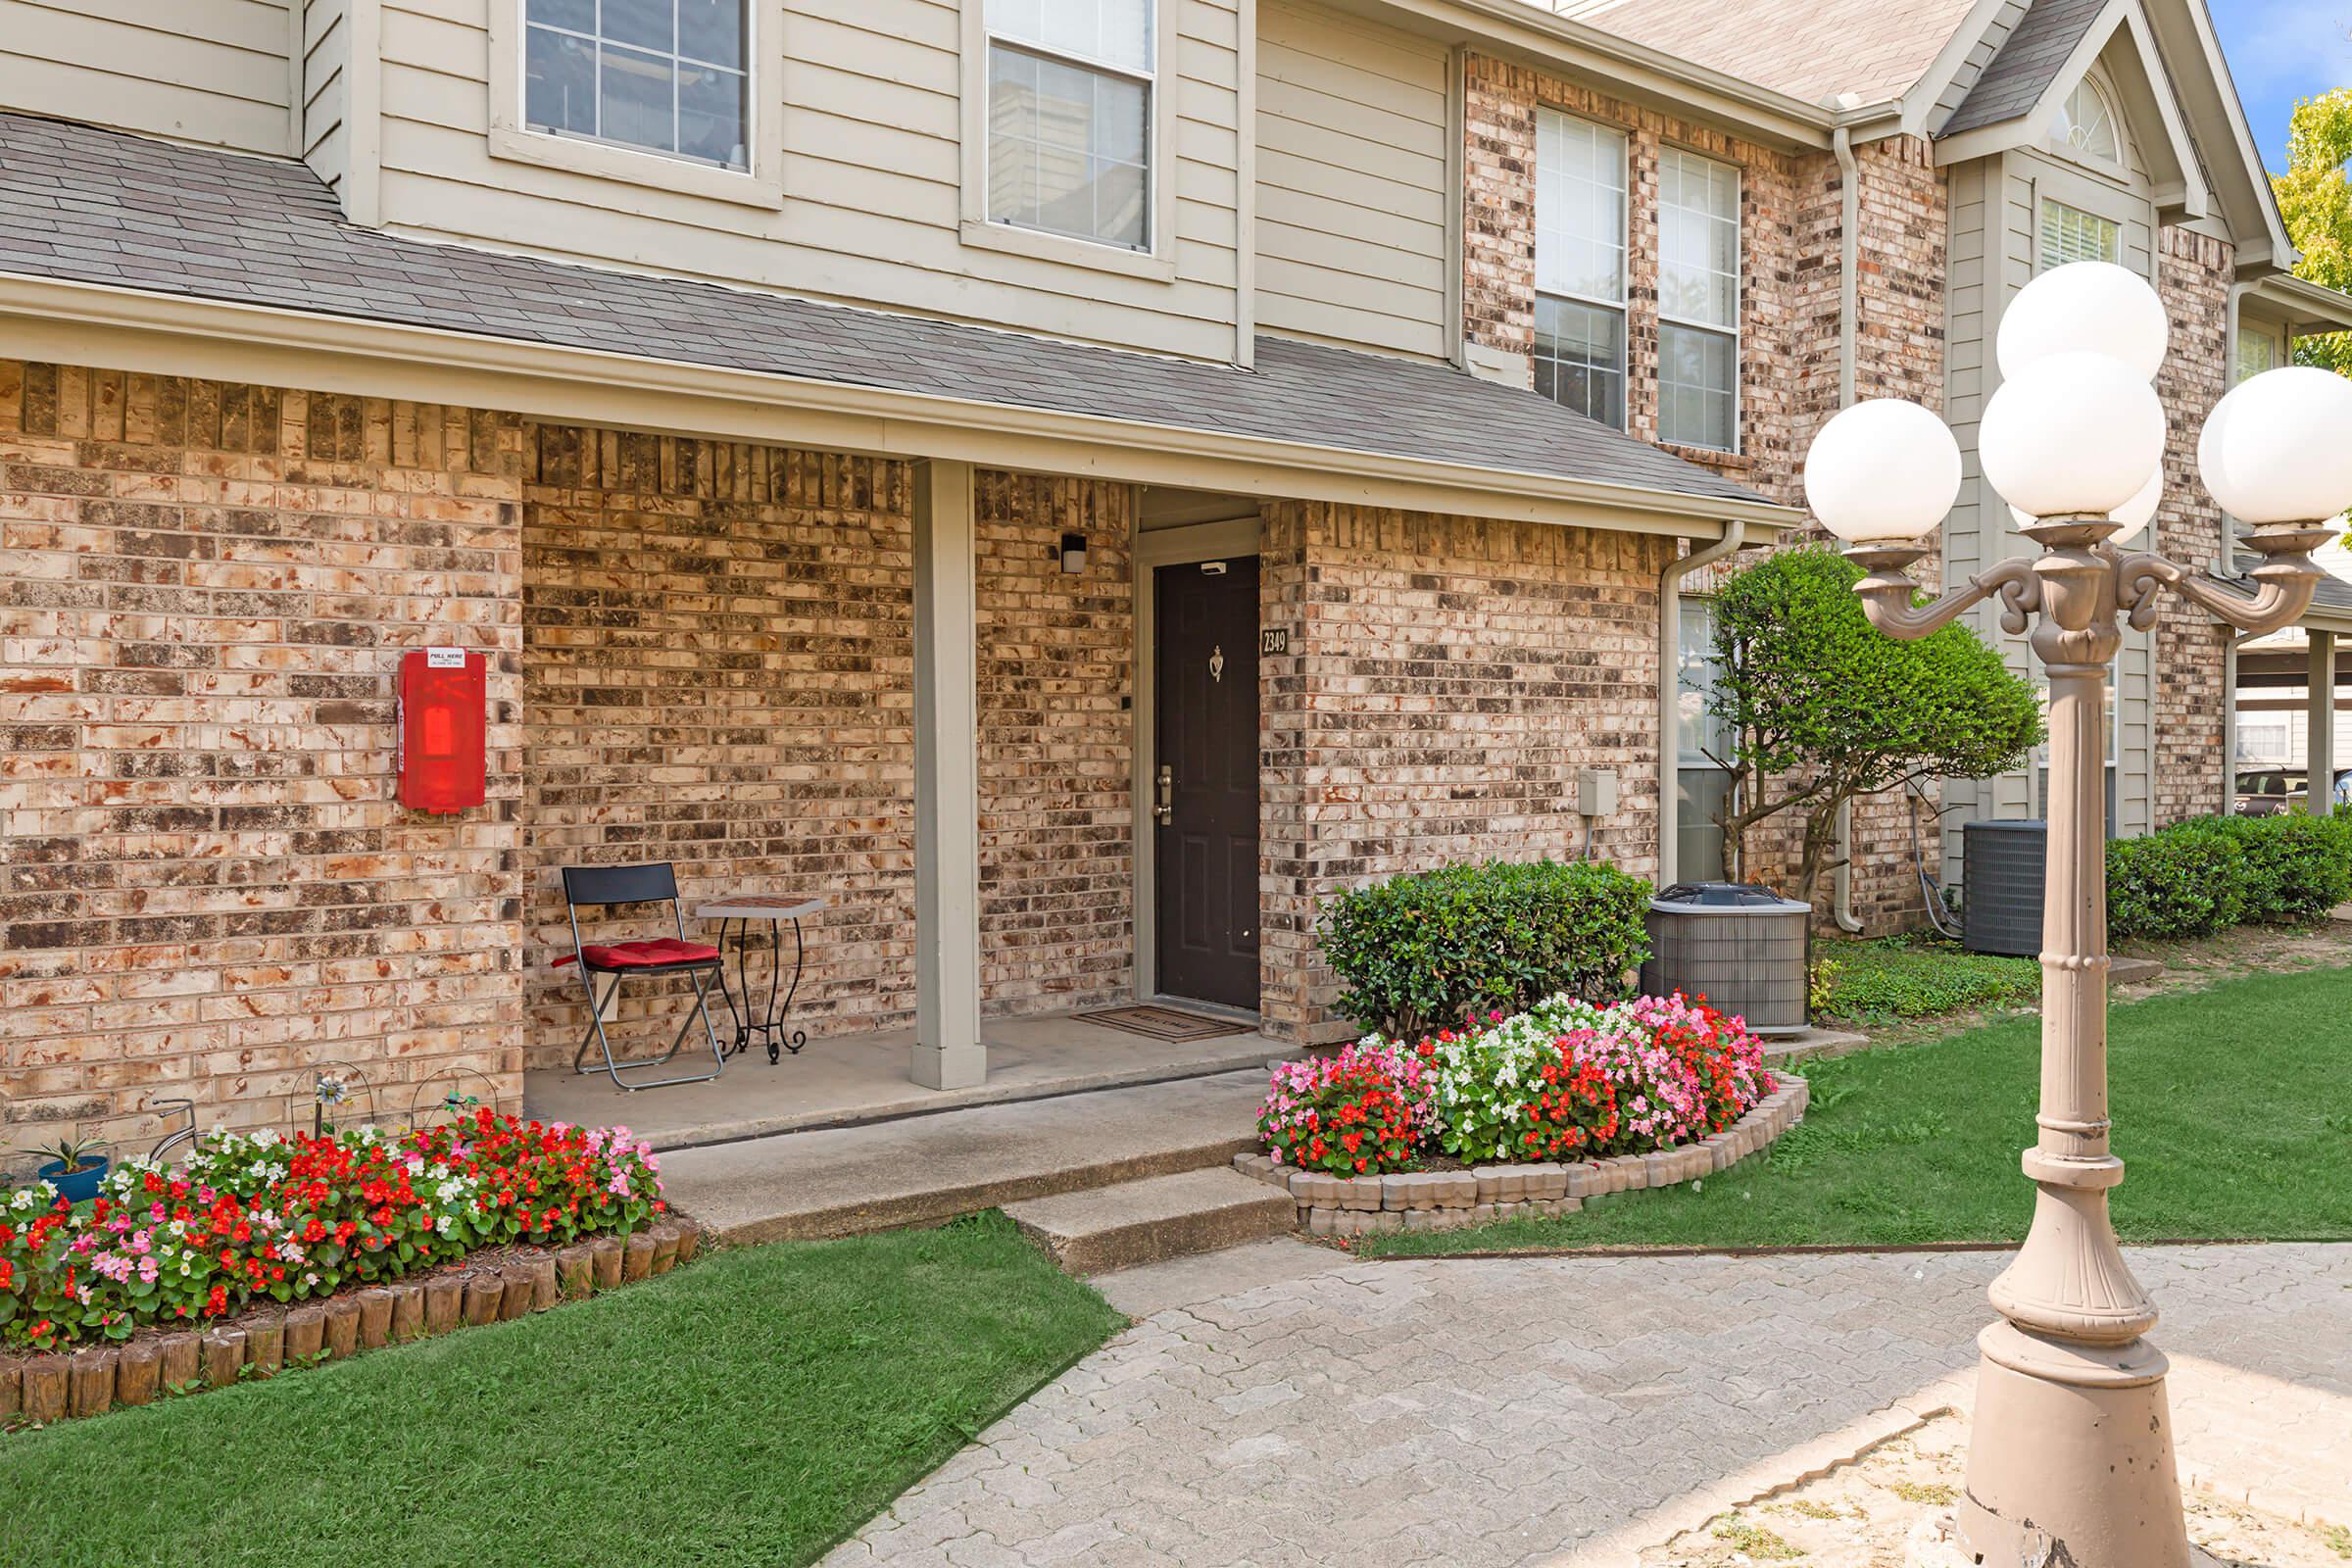 WELCOME TO THE PET-FRIENDLY PLANO PARK TOWNHOMES IN PLANO, TEXAS